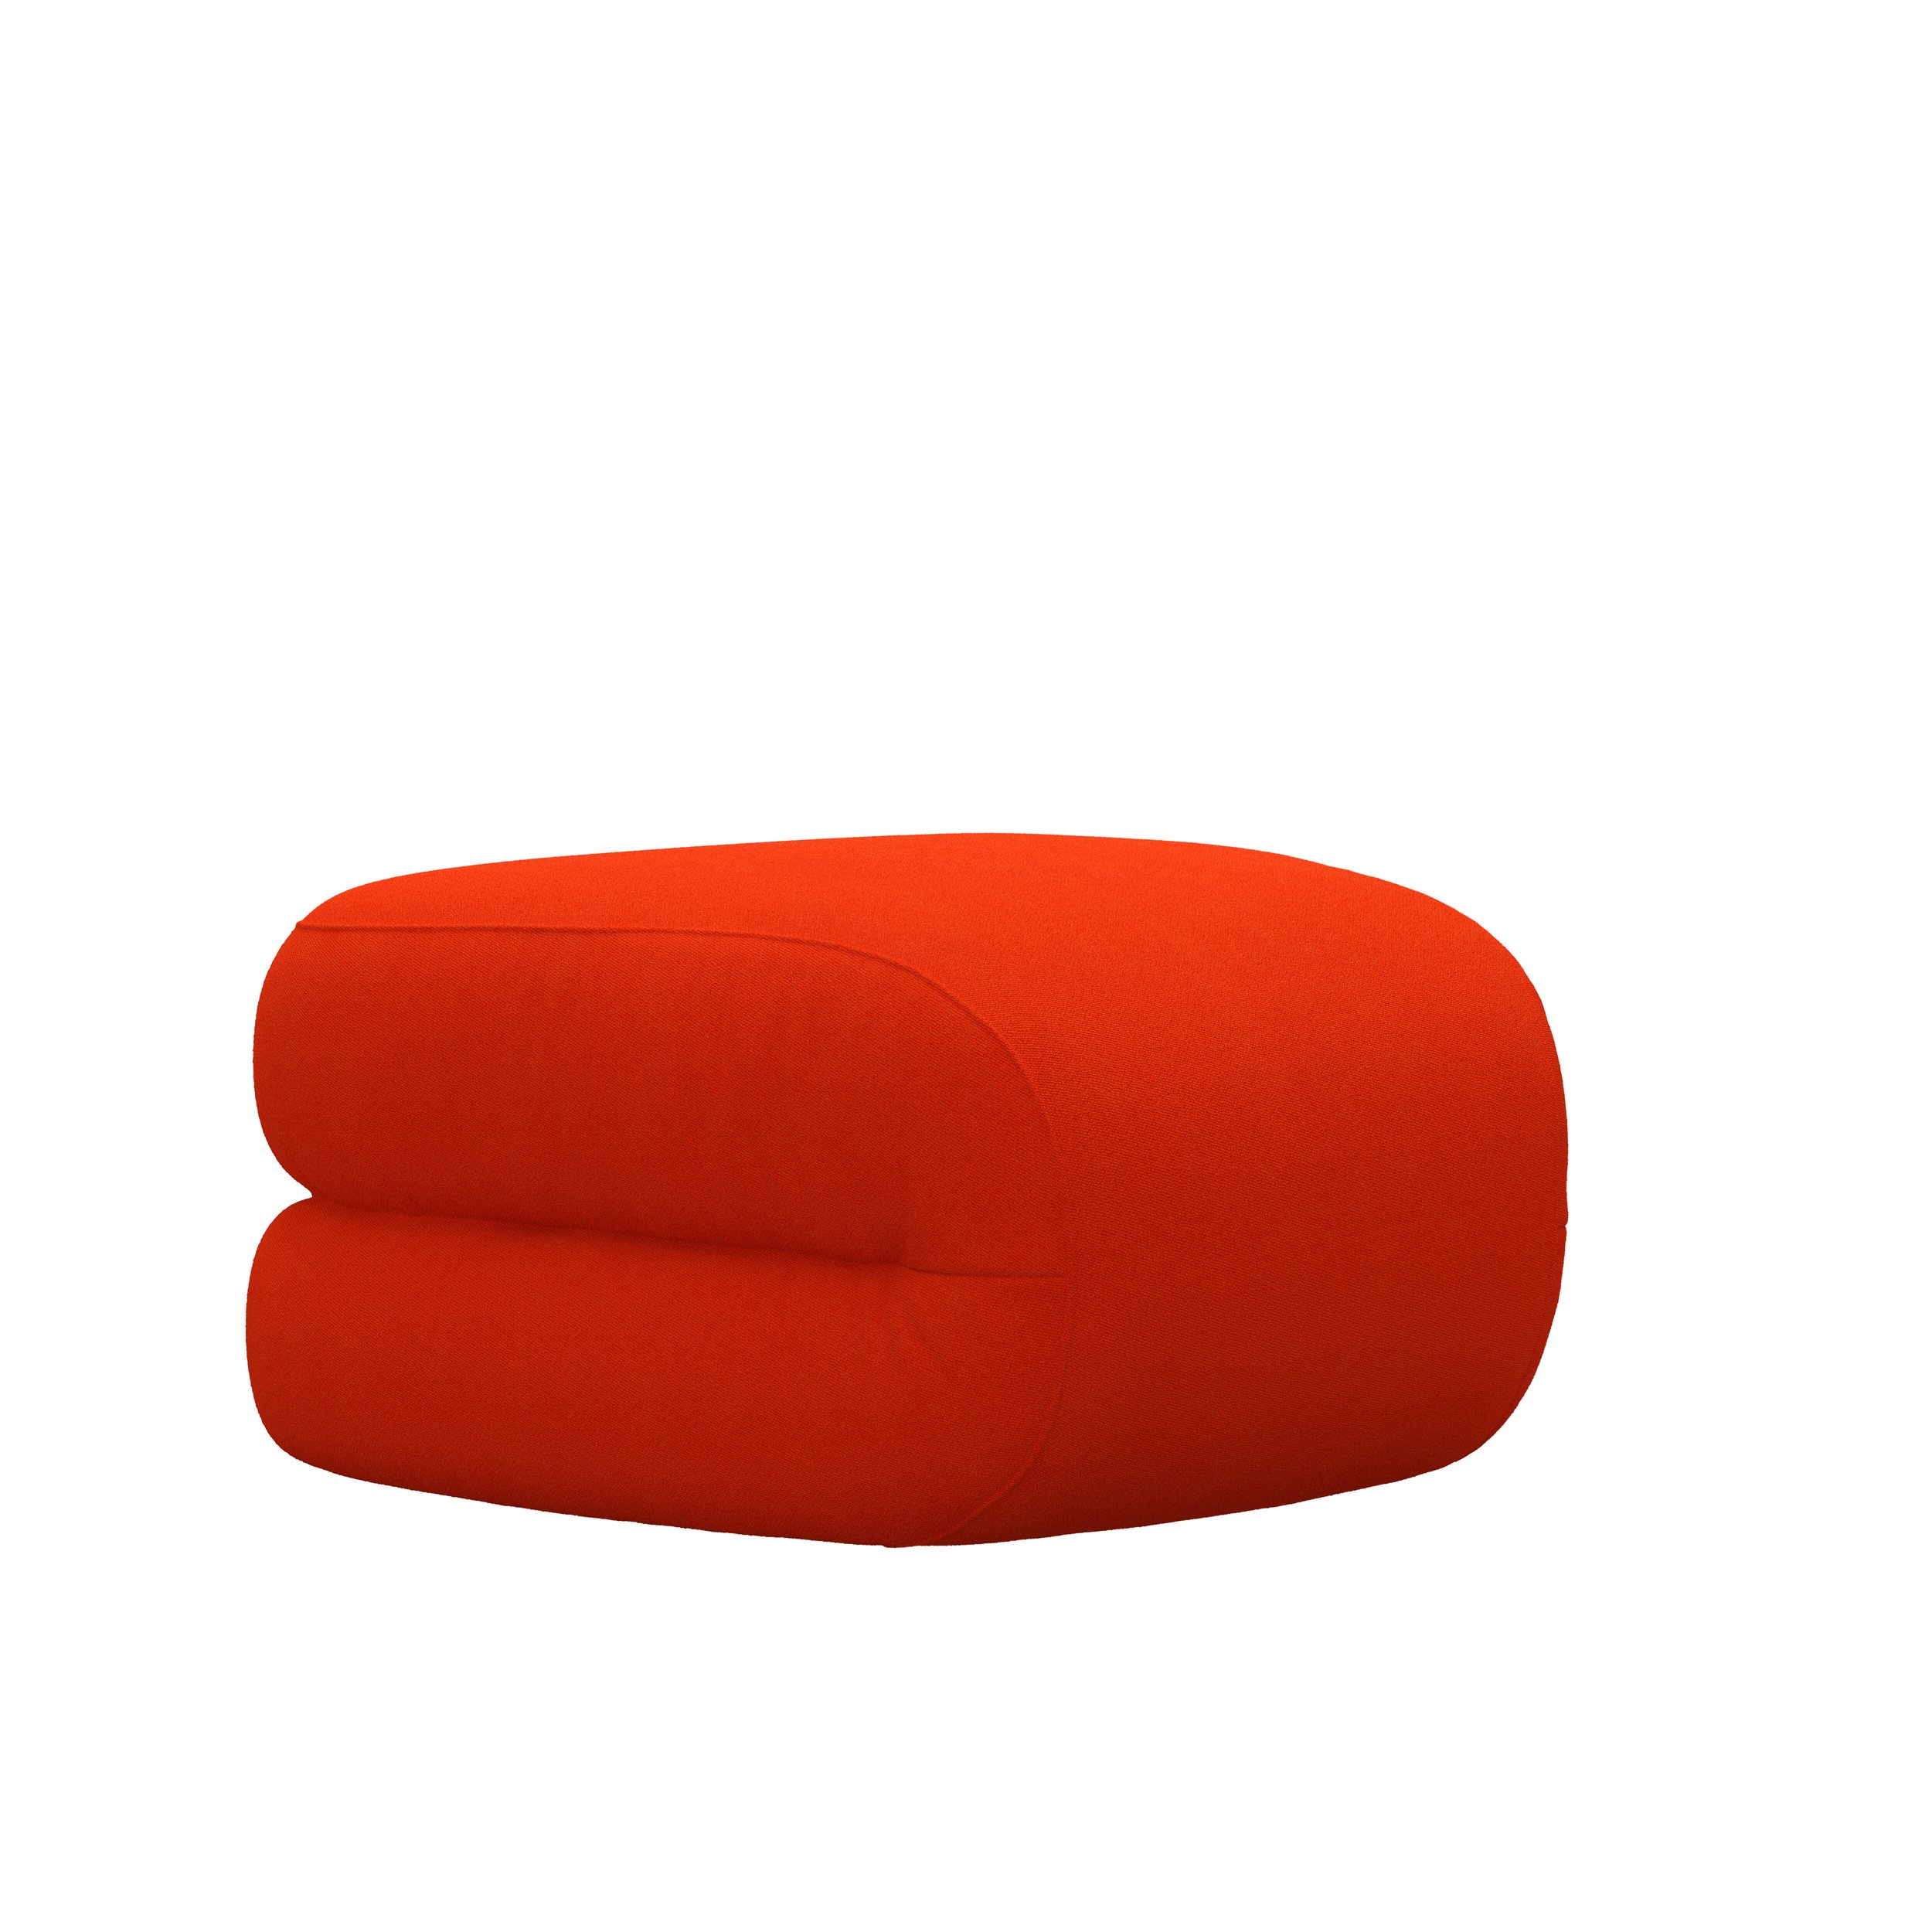 Lammhults_Bau_pouf_closed_red_frontangle_p01.jpg